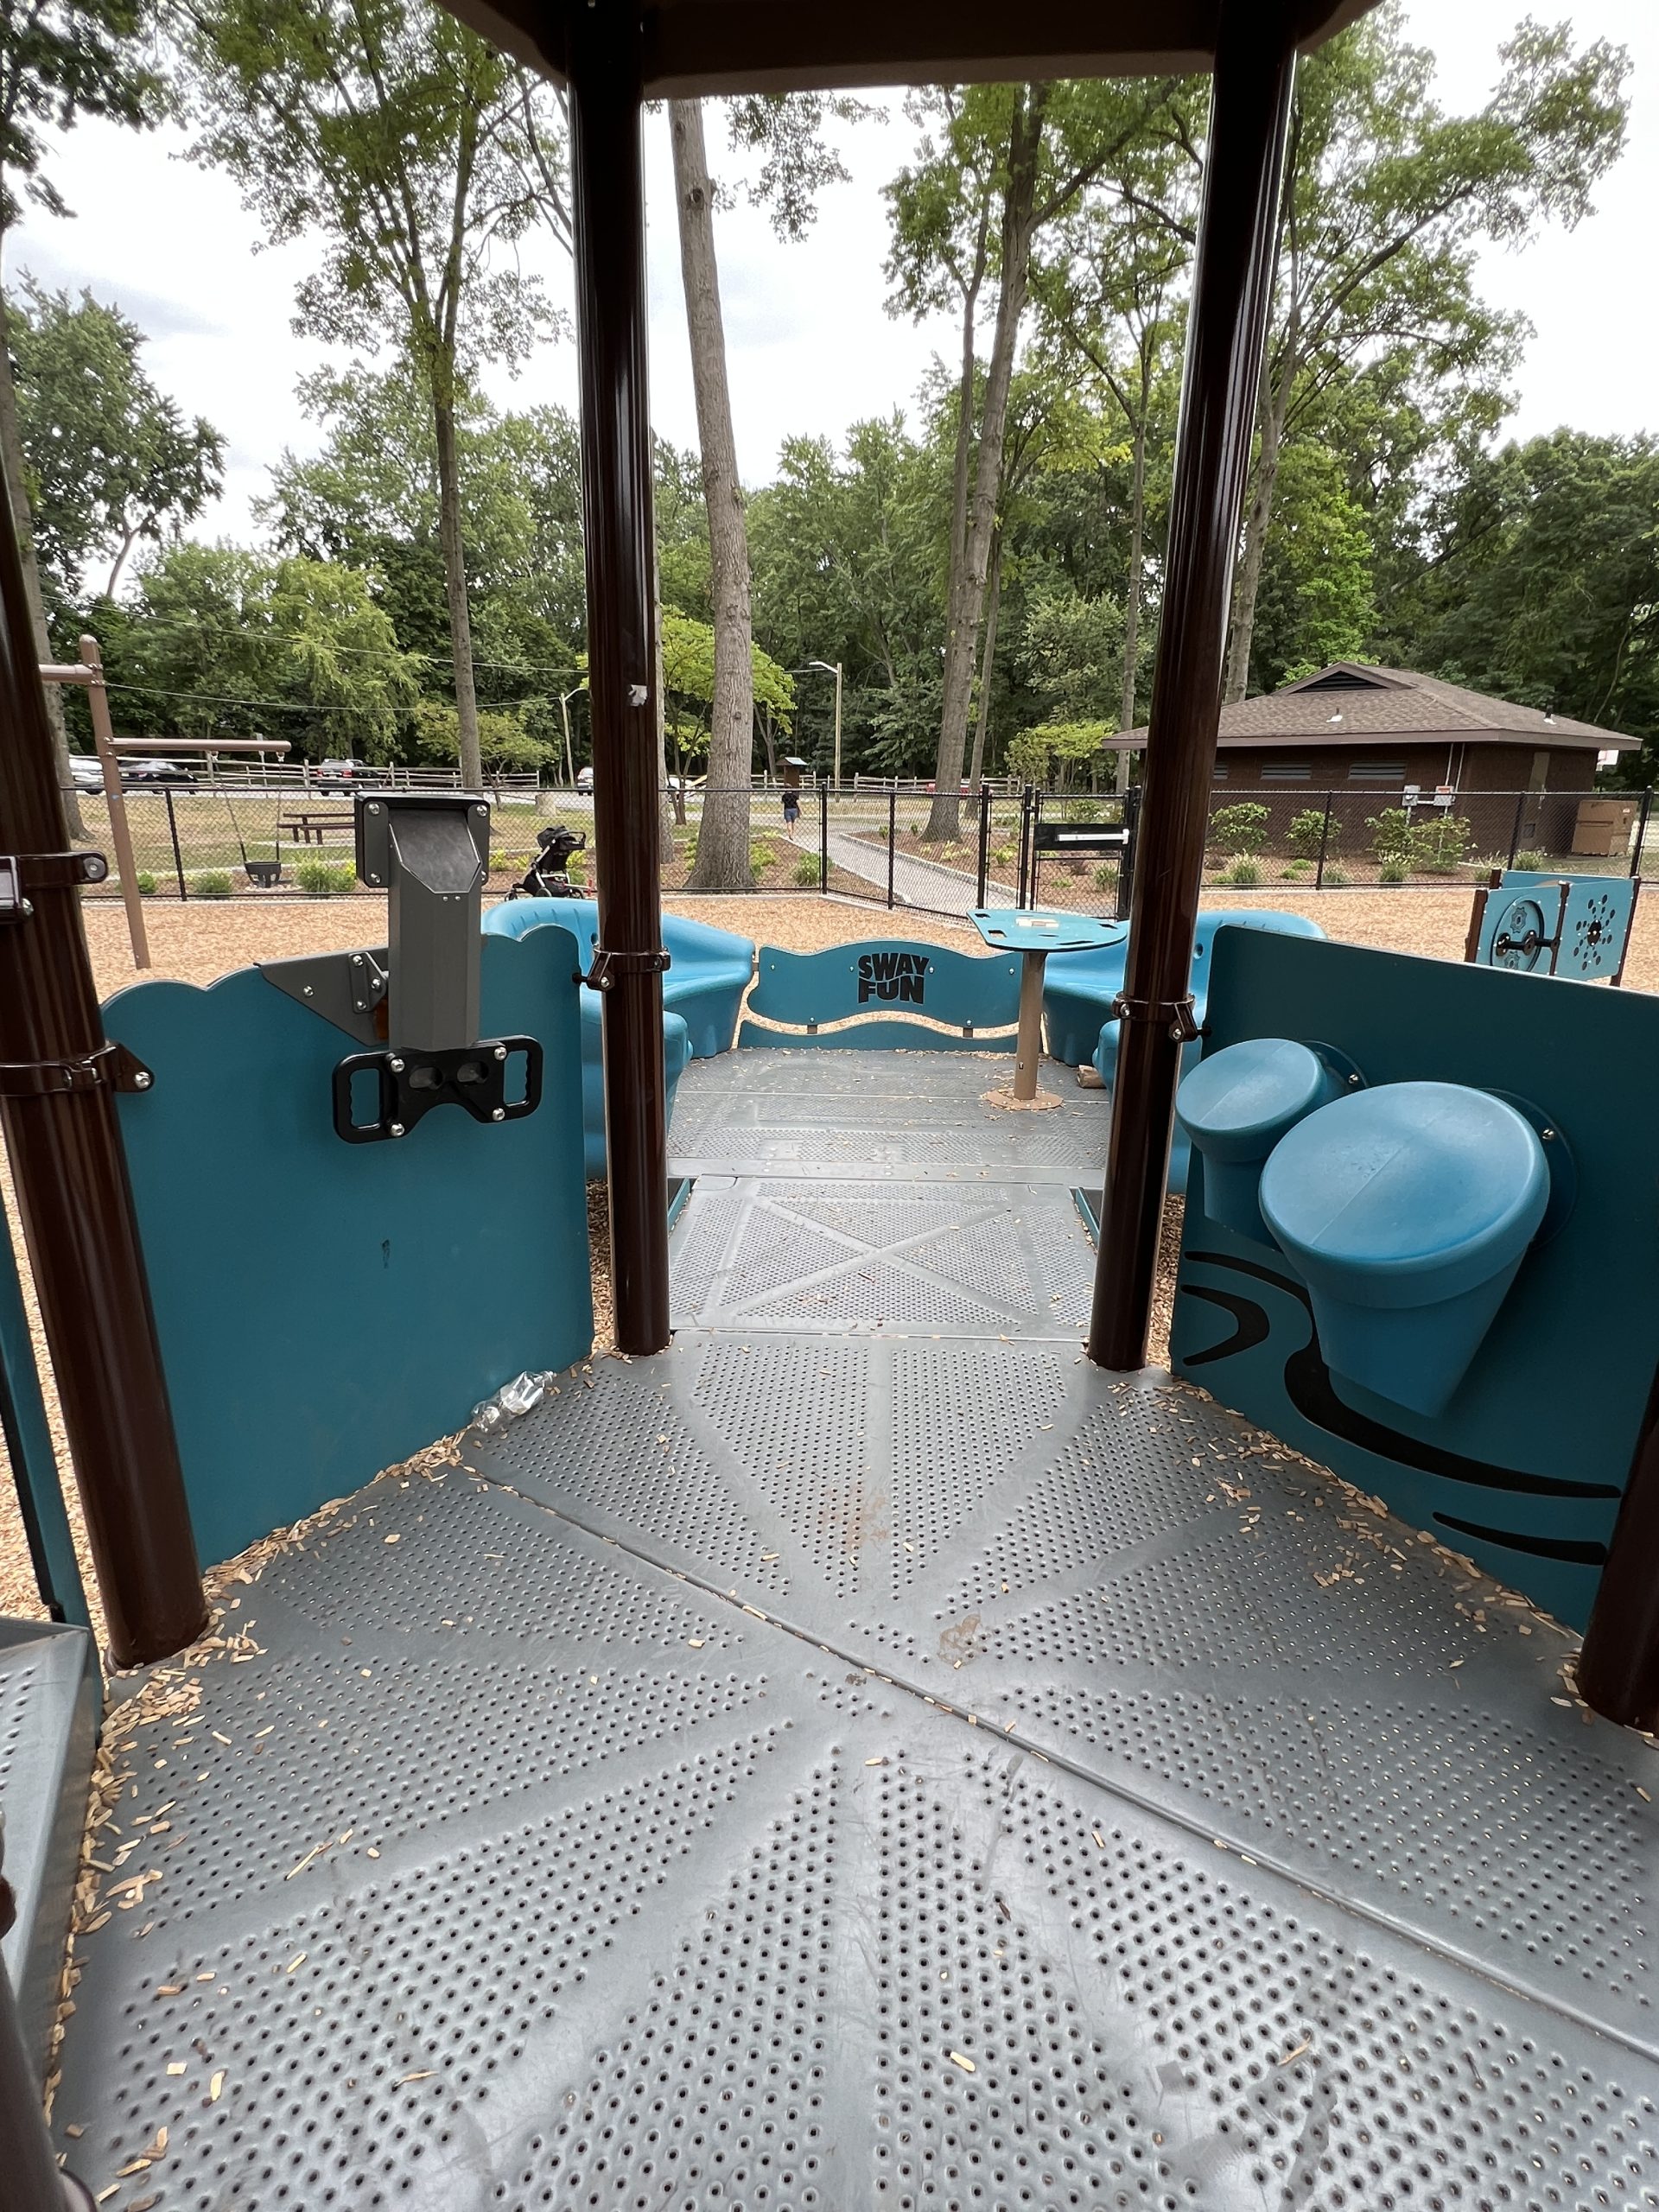 Goffle Brook Park Playground in Hawthorne NJ - Large playground feature - Sensory play periscope and drums wide platform leading to sway fun